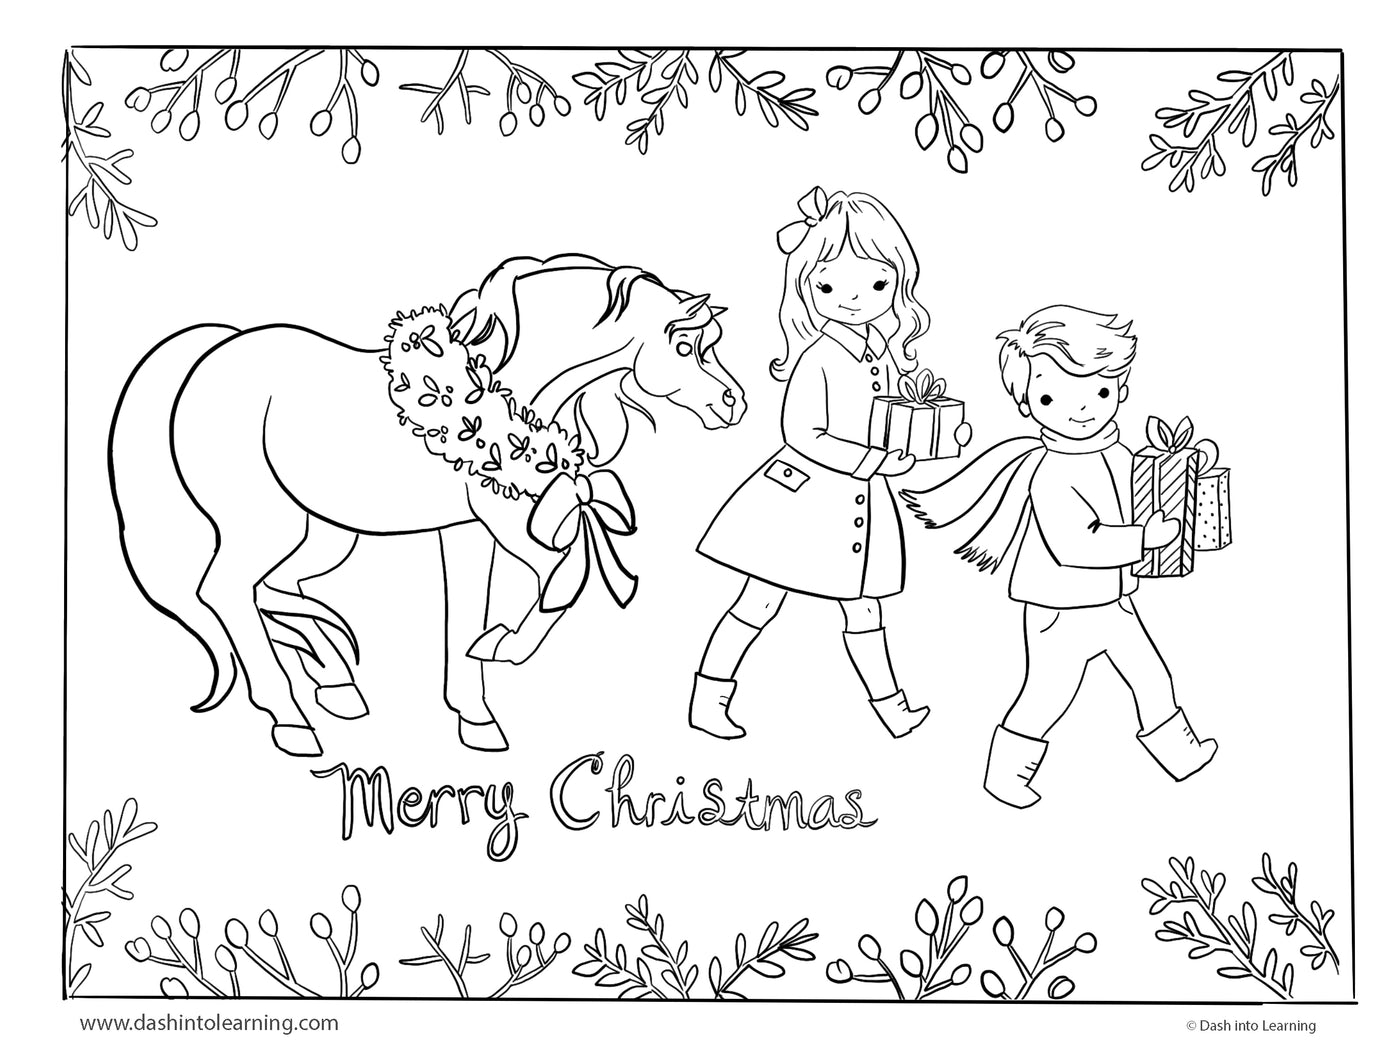 Merry Christmas Coloring Page and Art Print